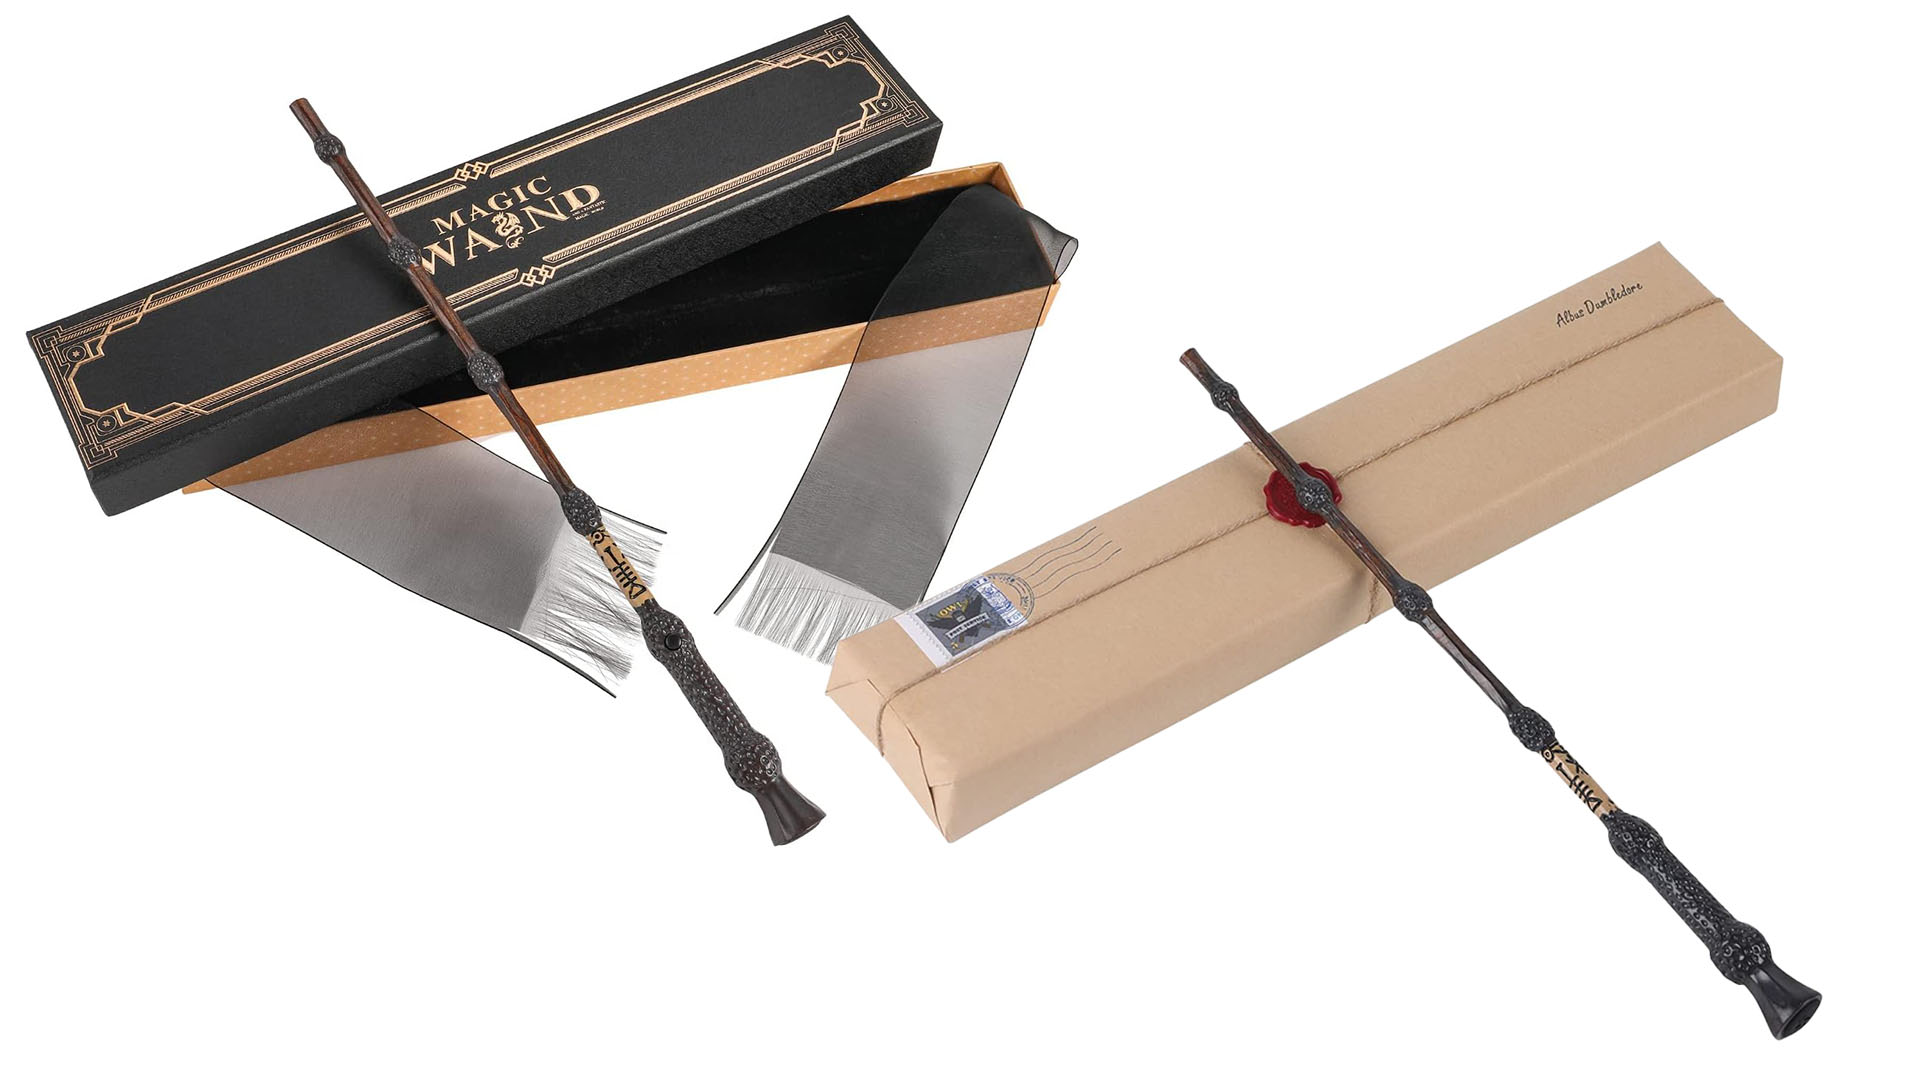 Harry Potter Magic Wand Fireball Unboxing and Review 2022 - Does